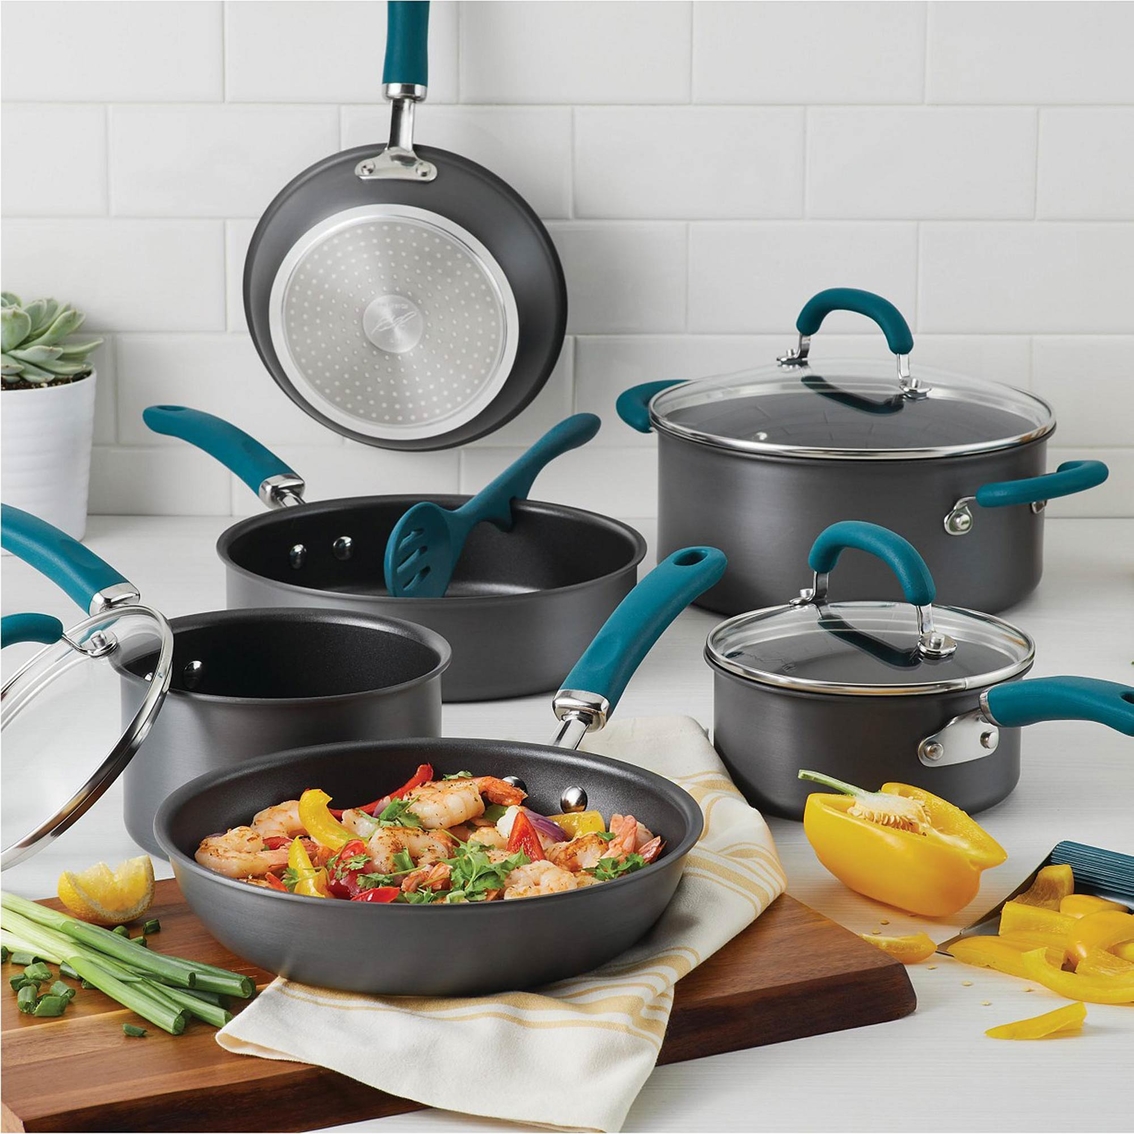 Rachael Ray Create Delicious Hard Anodized Aluminum Nonstick 11 pc. Cookware Set - Image 7 of 7